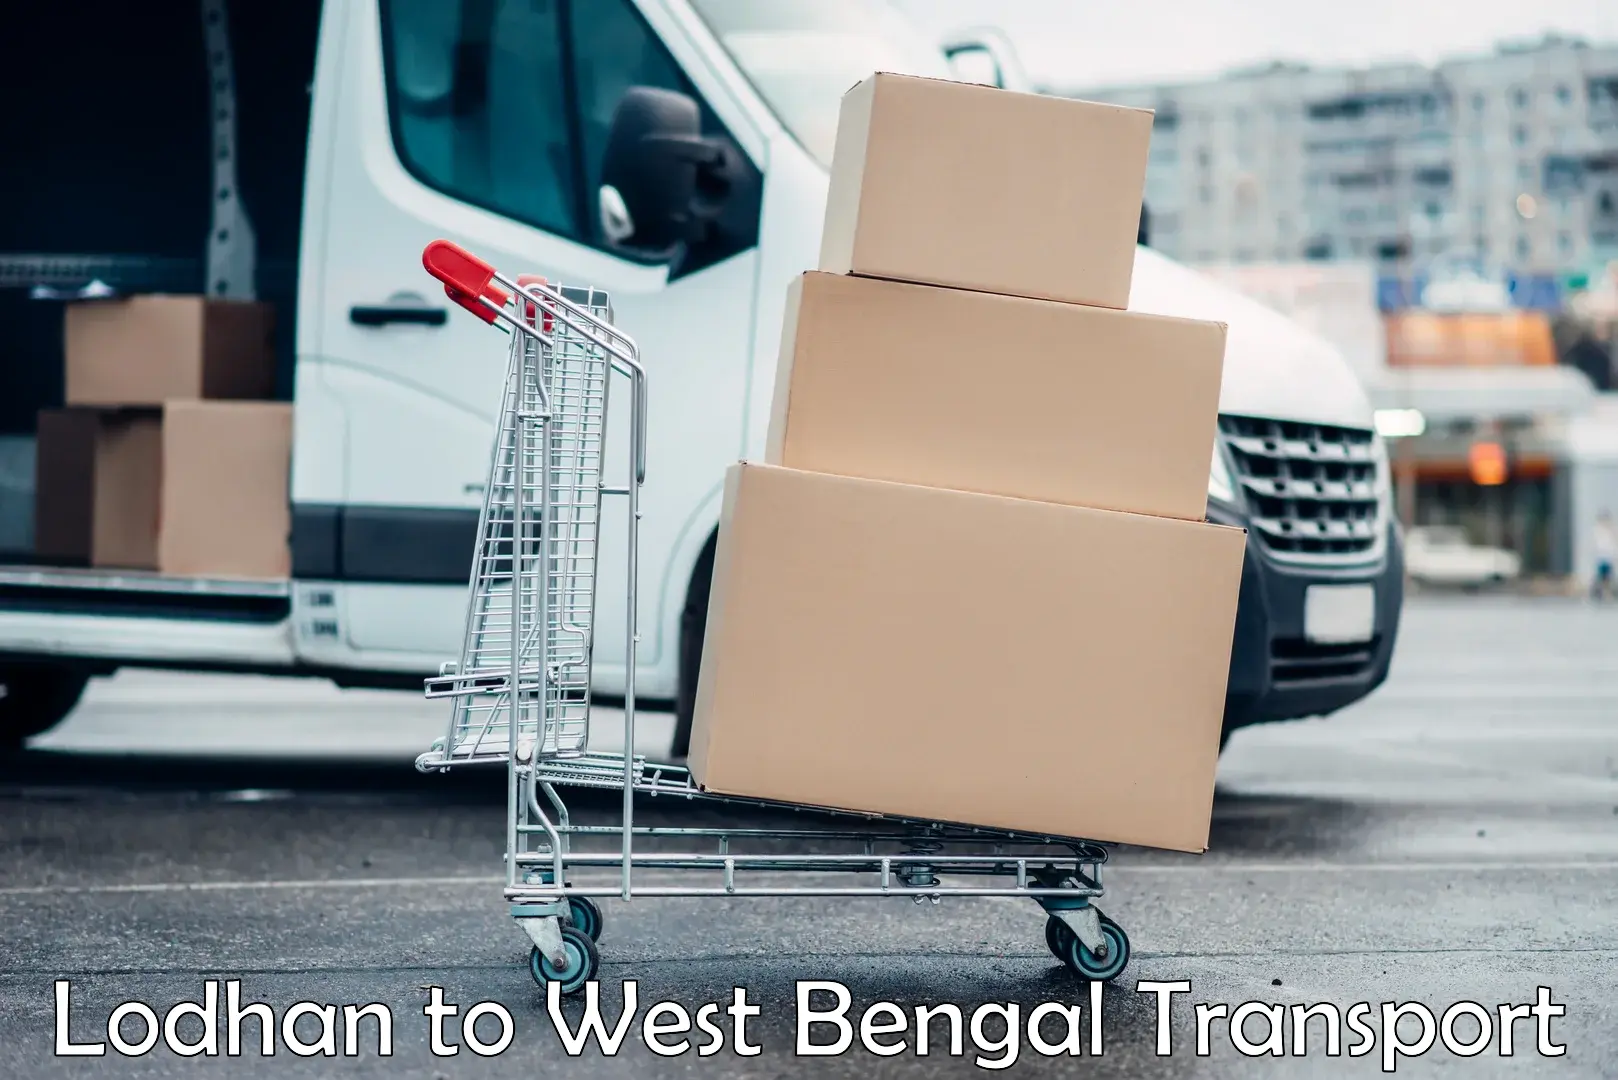 Cargo transport services Lodhan to West Bengal